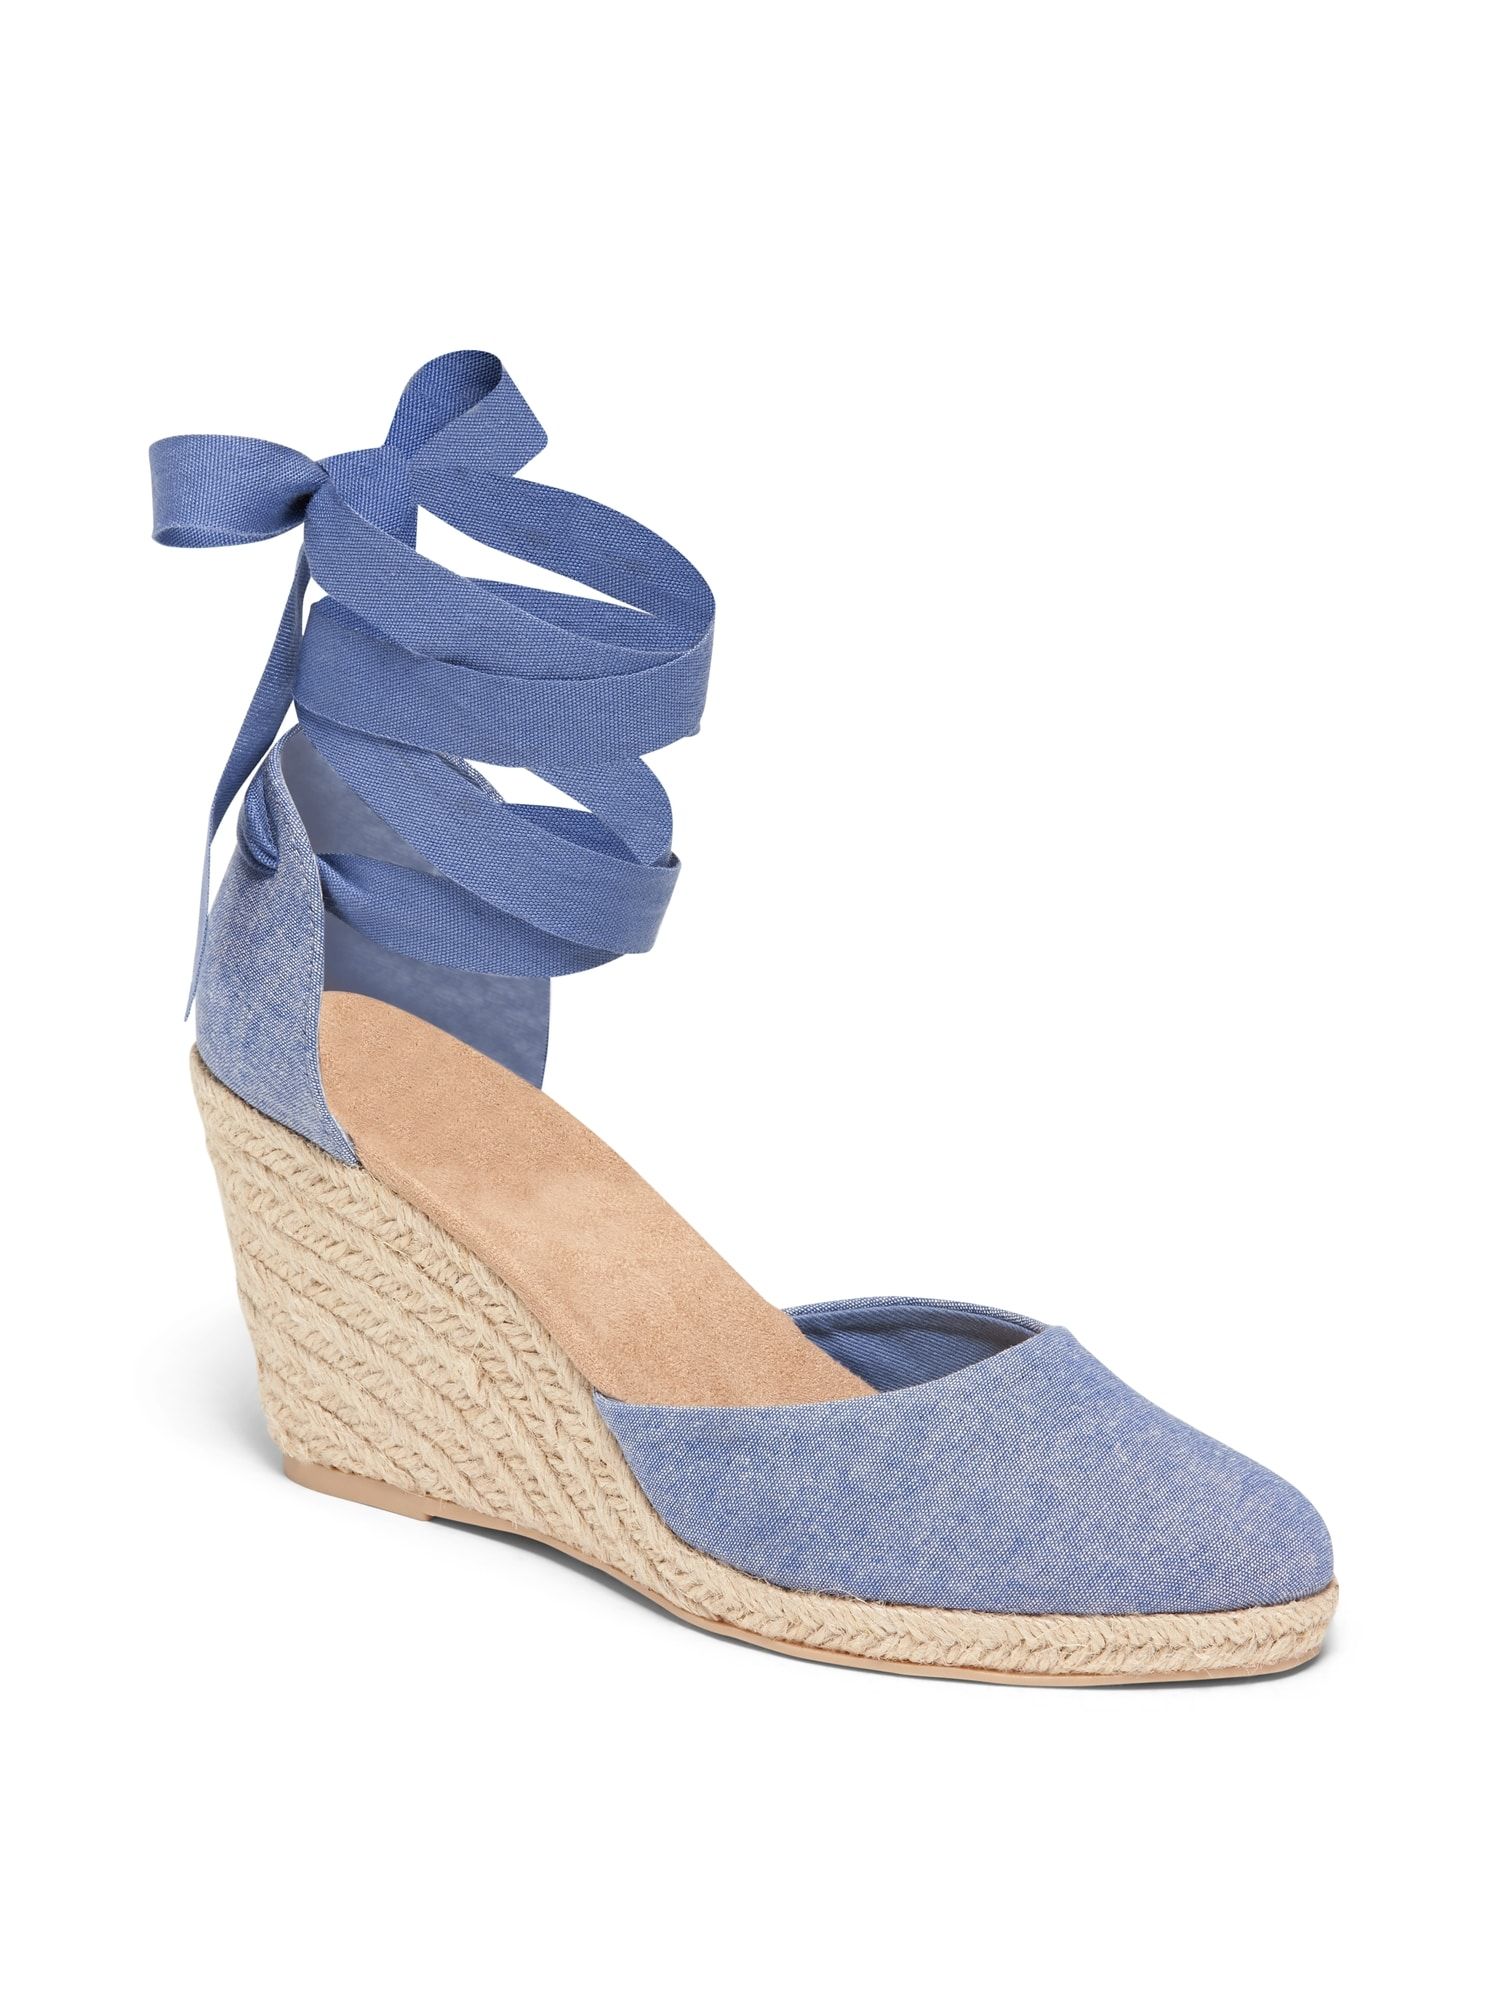 Chambray Espadrille Wedges for Women